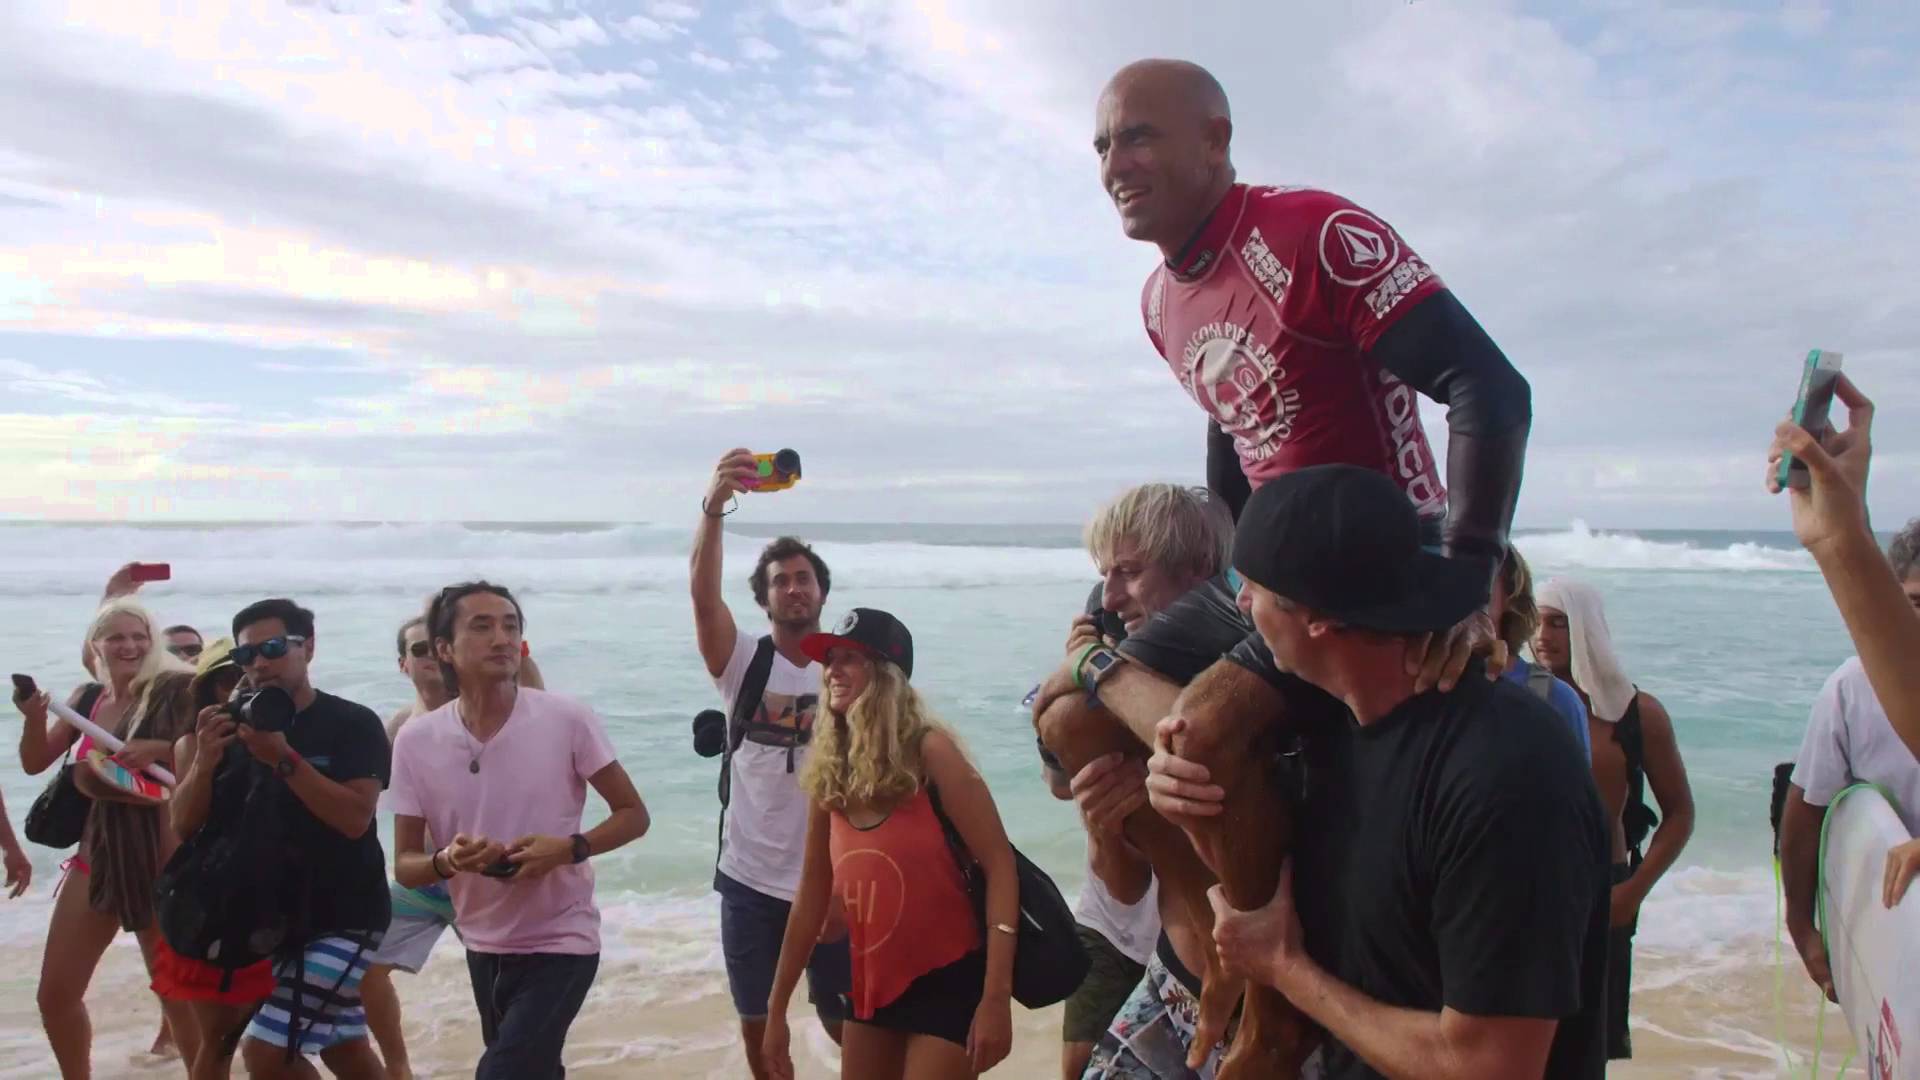 The Three Kings of the Volcom Pipe Pro 2016